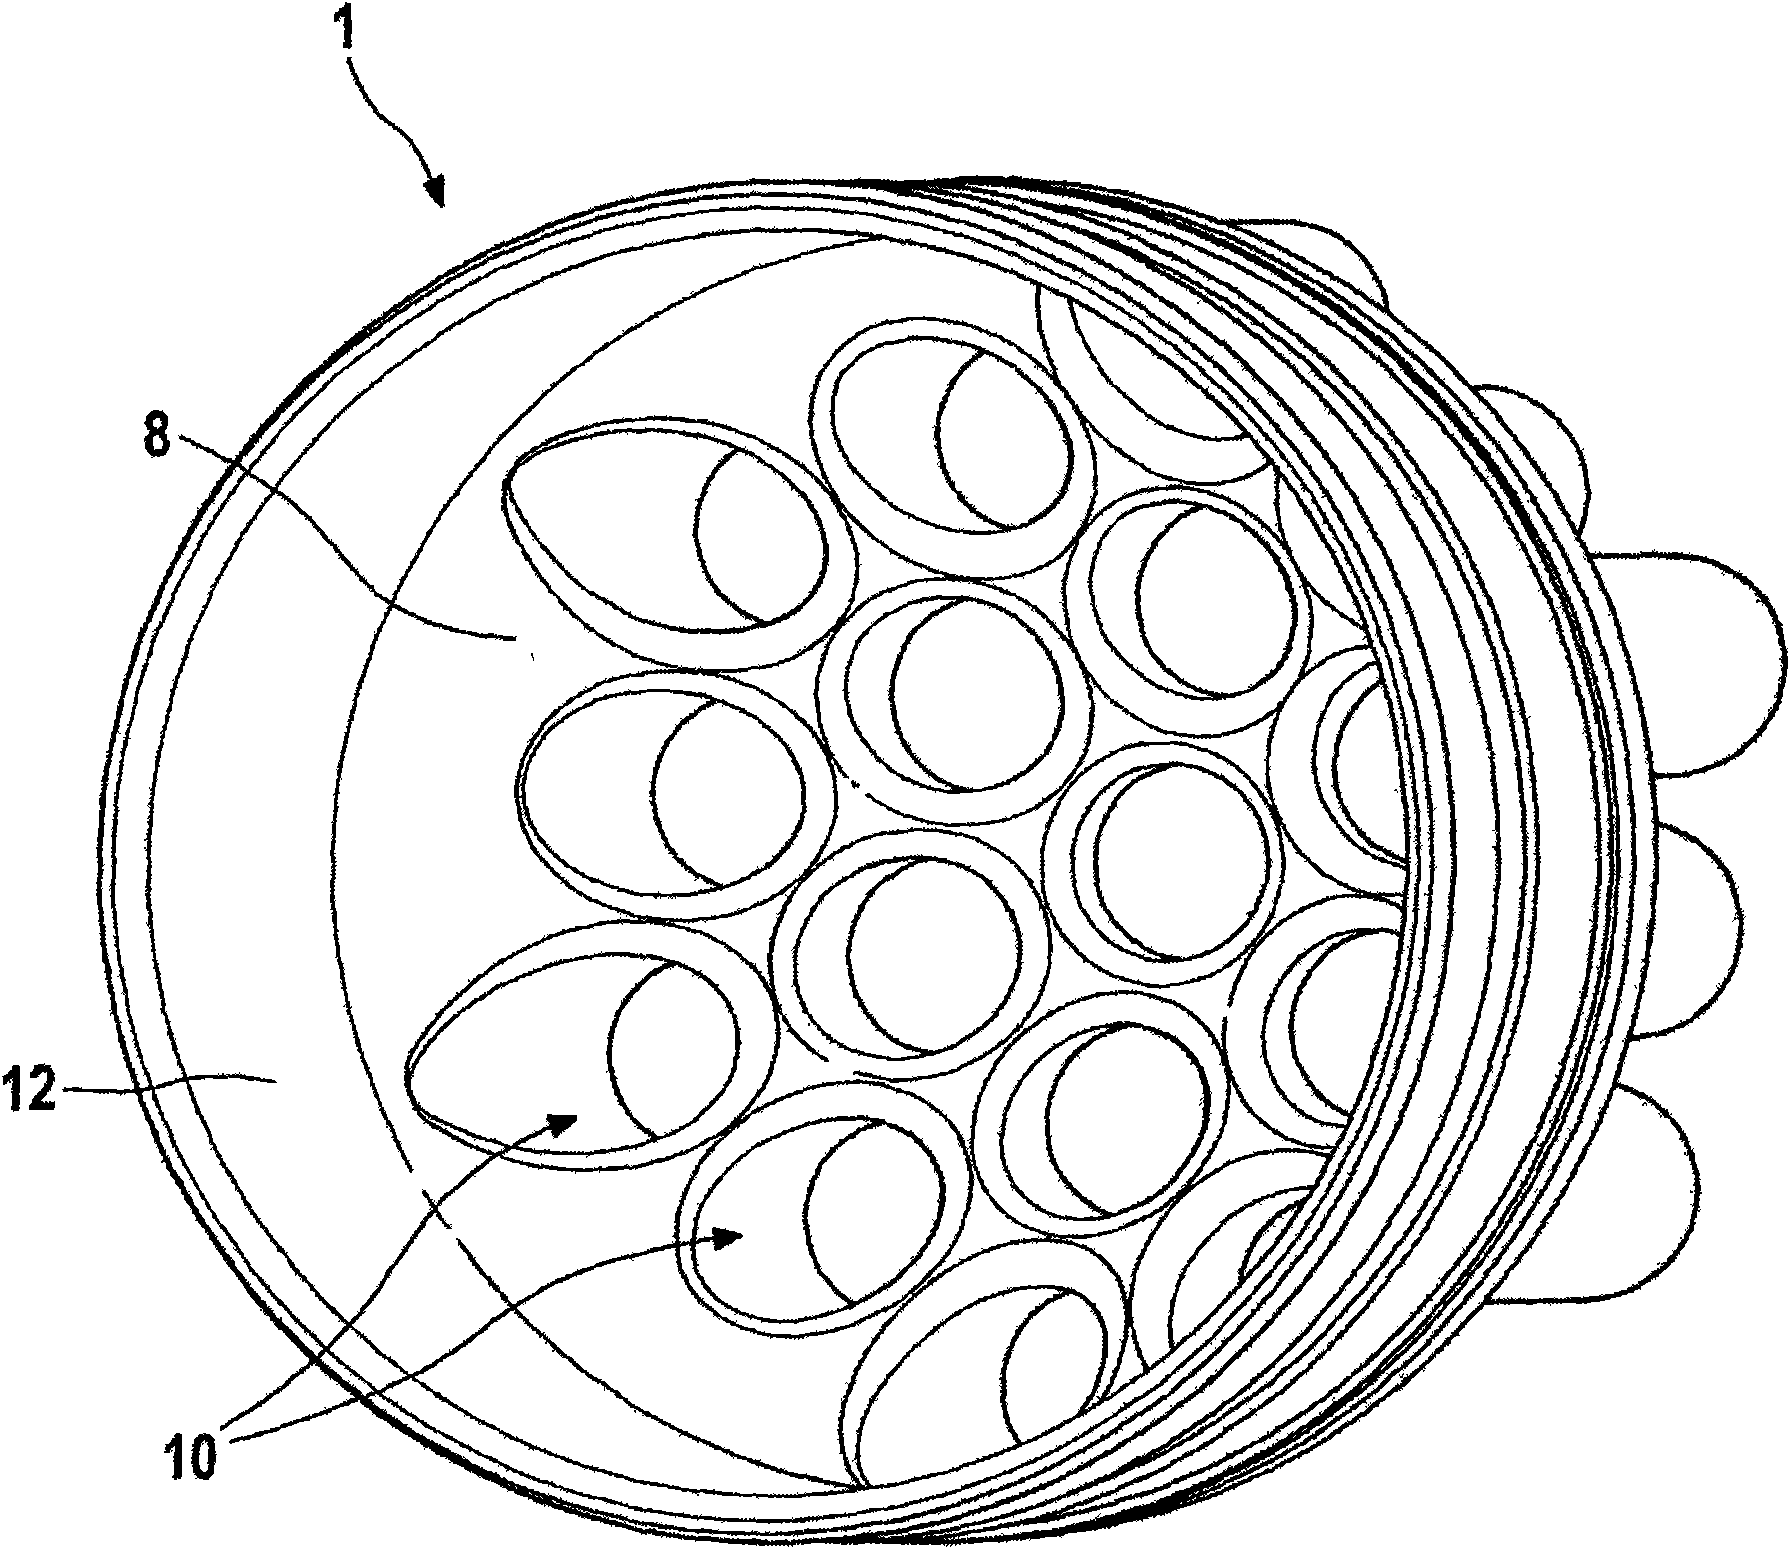 Pipe heat exchanger, dual deflection flanged bend, adapter, system and method for transferring heat